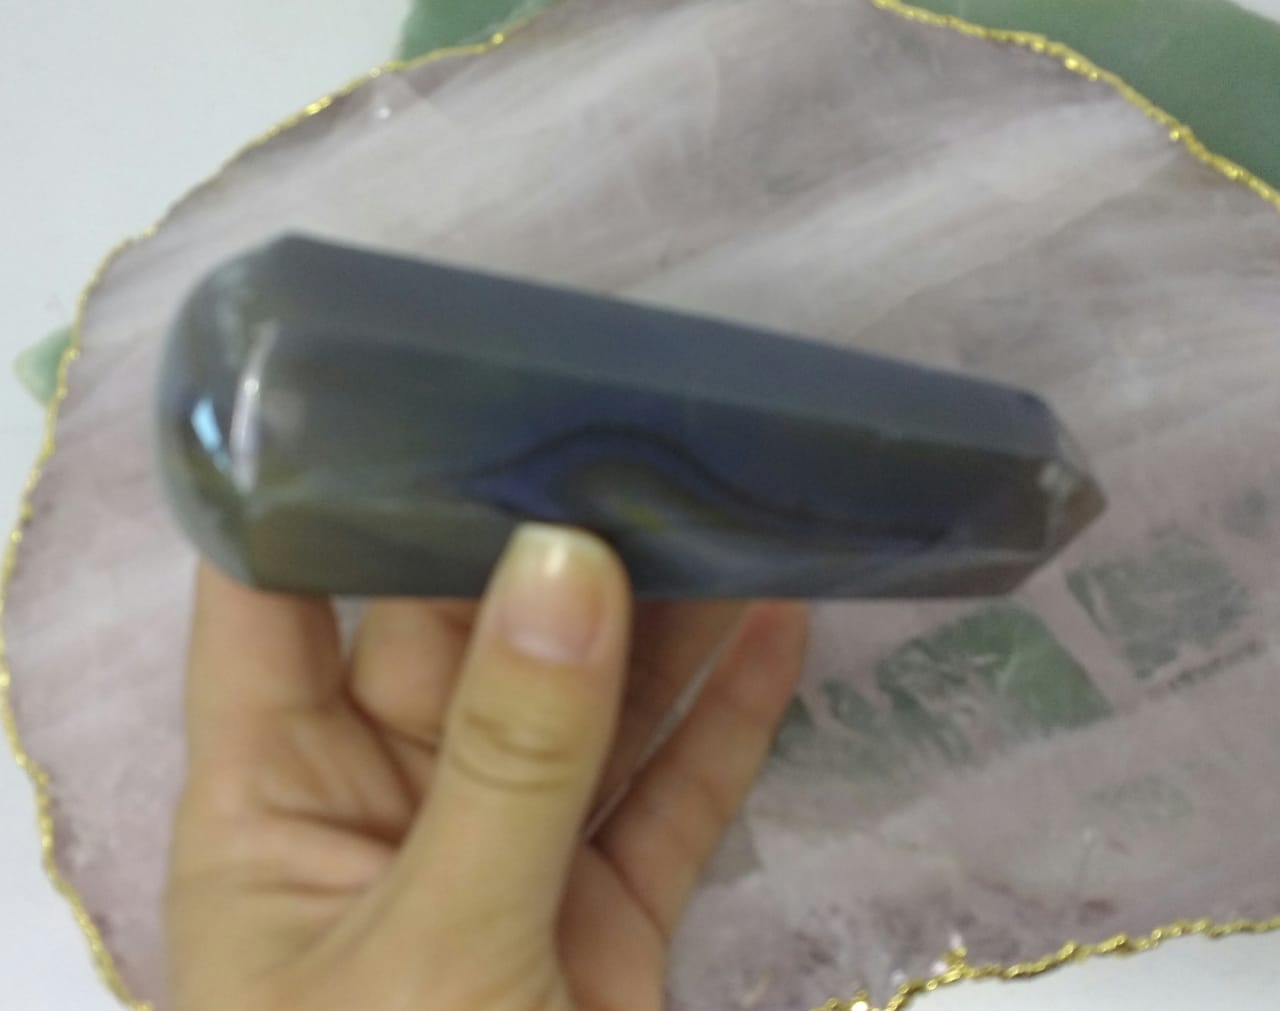 Stones from Uruguay - Natural Agate Declined 6 Facet Massage Wand - Natural Agate Declined Wand Point for Massage